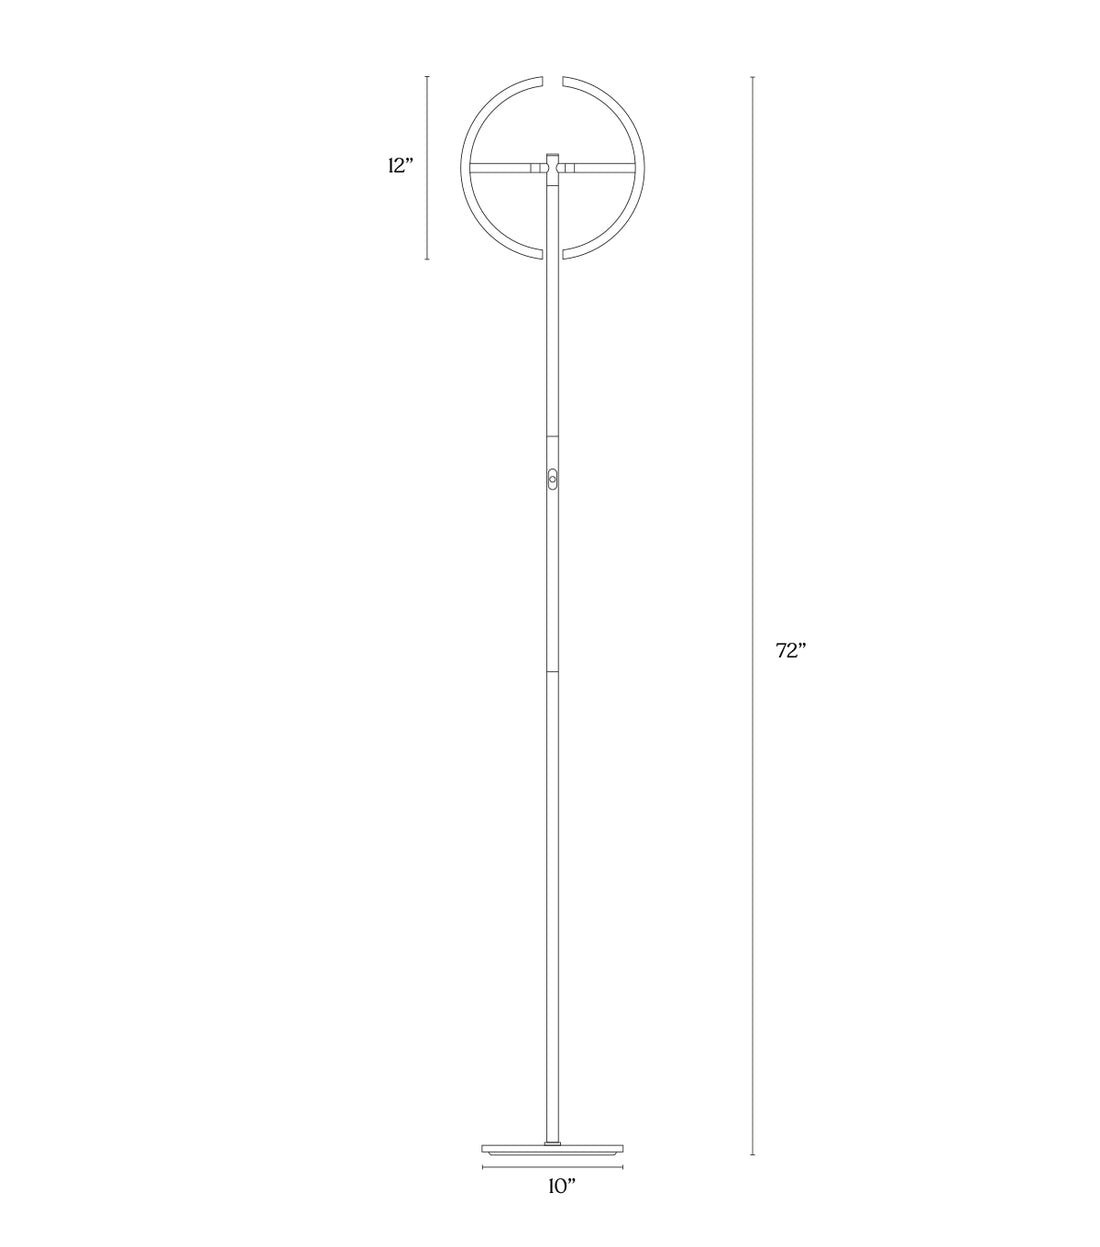 Brightech Halo Split - Modern LED Torchiere Floor Lamp, for Offices - Bright Standing Pole Light - Tall, Dimmable Uplight for Reading in Your Bedroom or Living Room